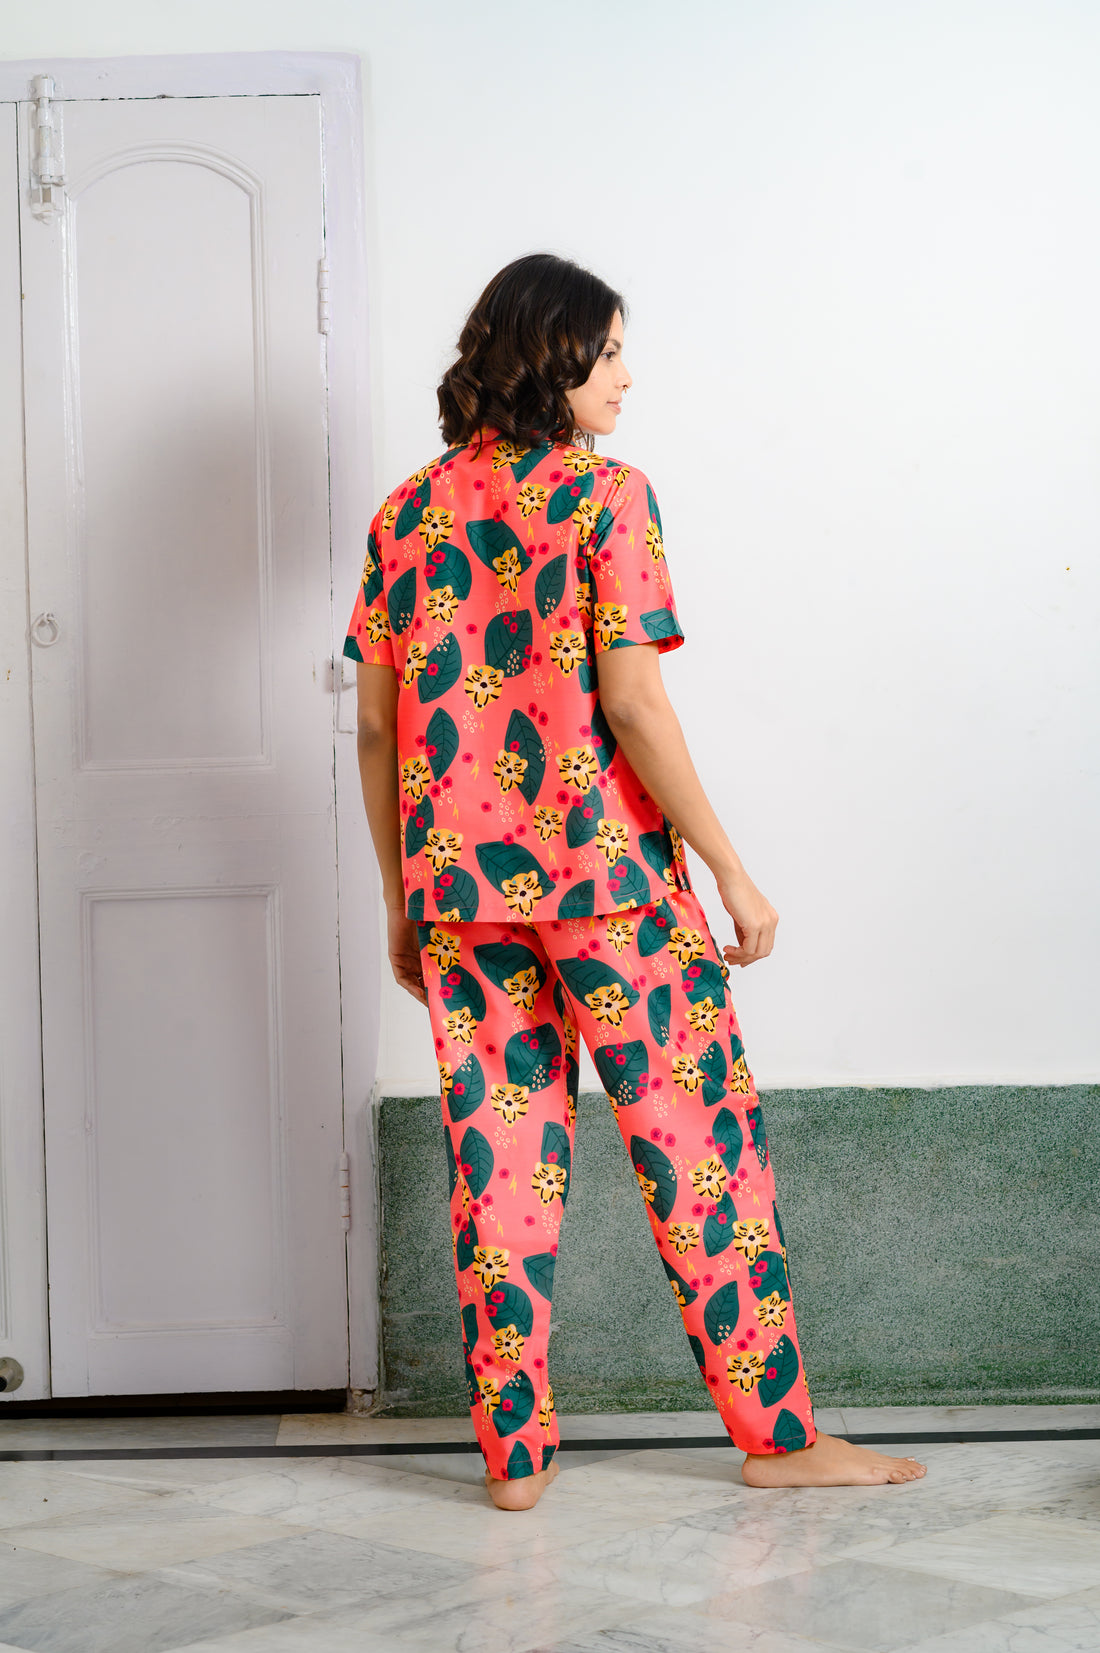 Roar in Style: Quirky Tiger Print Pajama Set in Salmon Pink